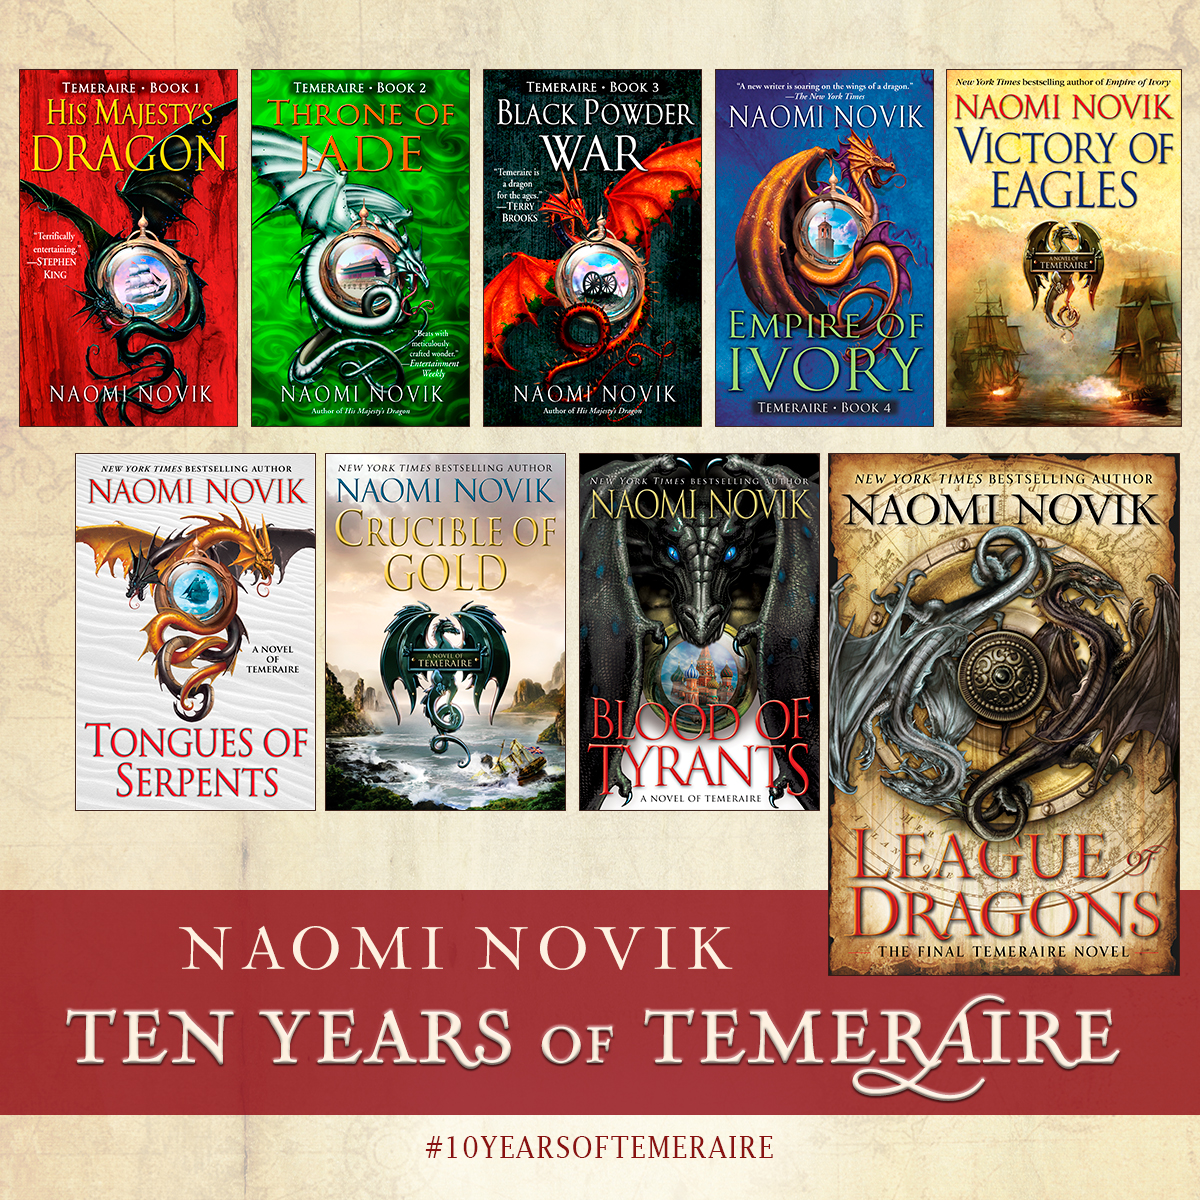 The 10 Years of TEMERAIRE Contest